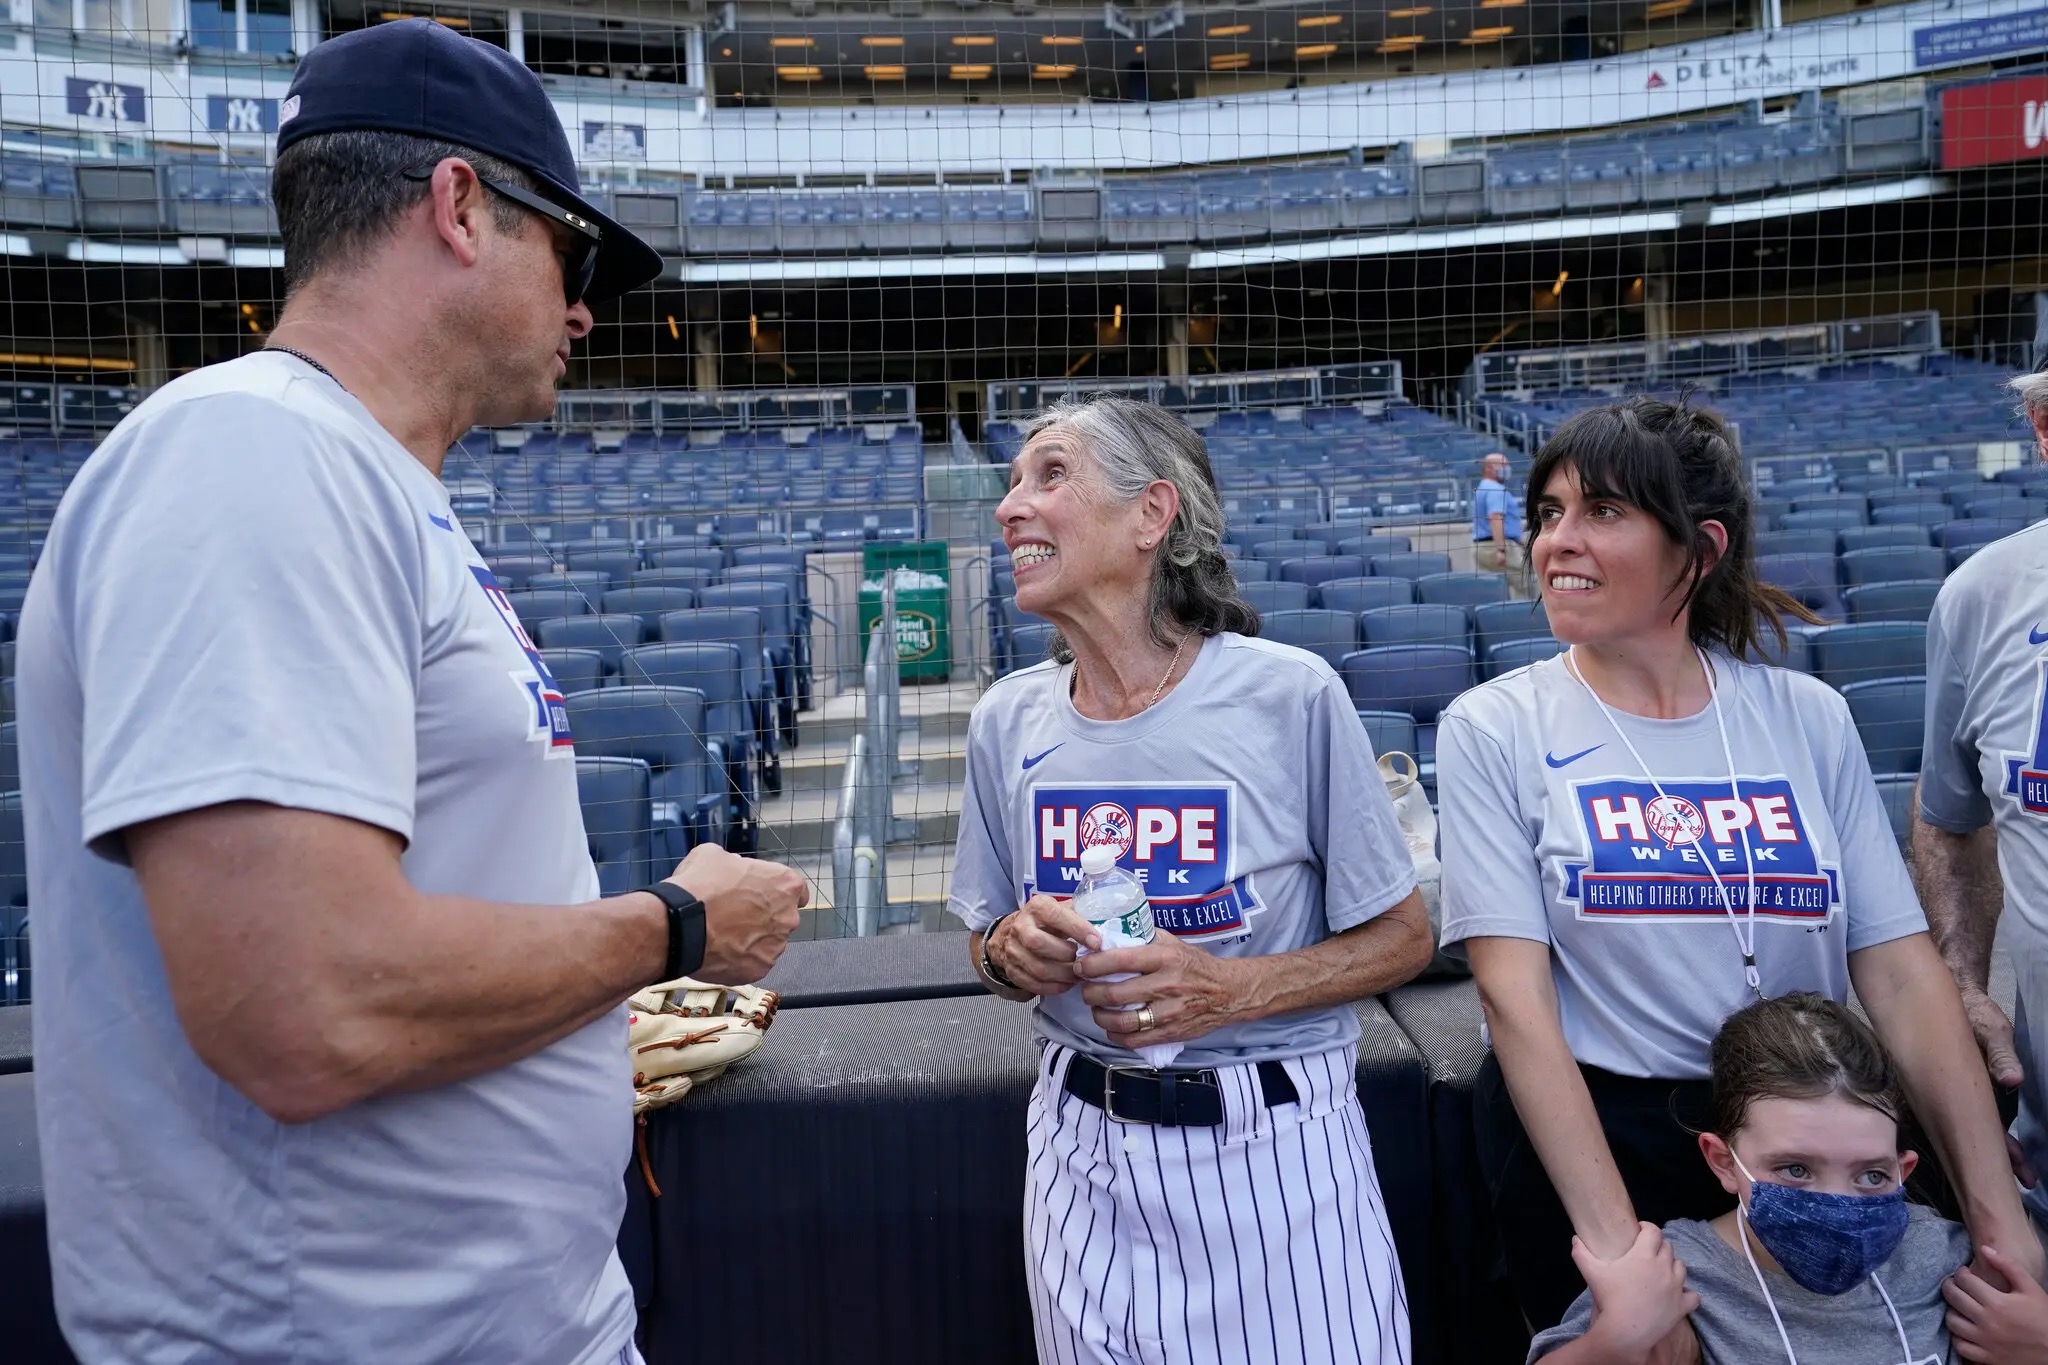 #2 Gwen Goldman | 70-Year Old Woman Finally Becomes Yankee Bat Girl After Being Rejected in 1961 | Zestradar